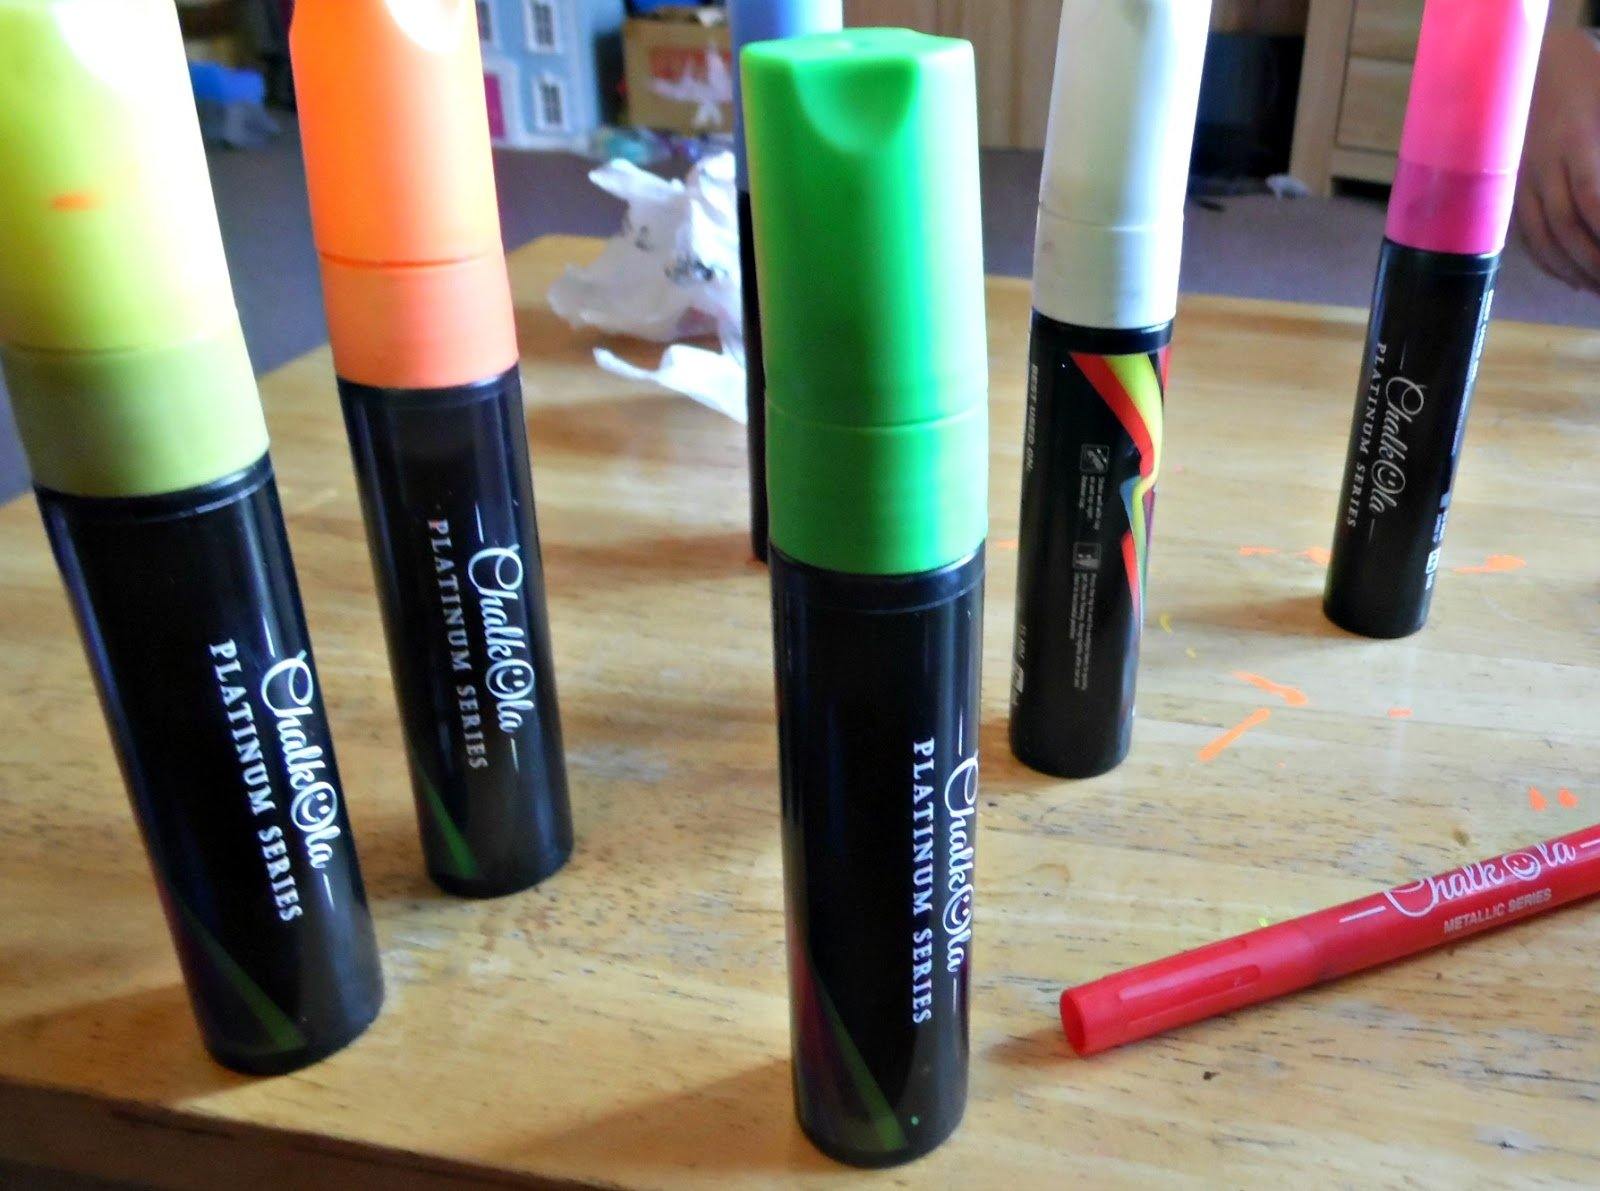 5 Ways to Use Chalk Markers featuring Chalkola Markers 